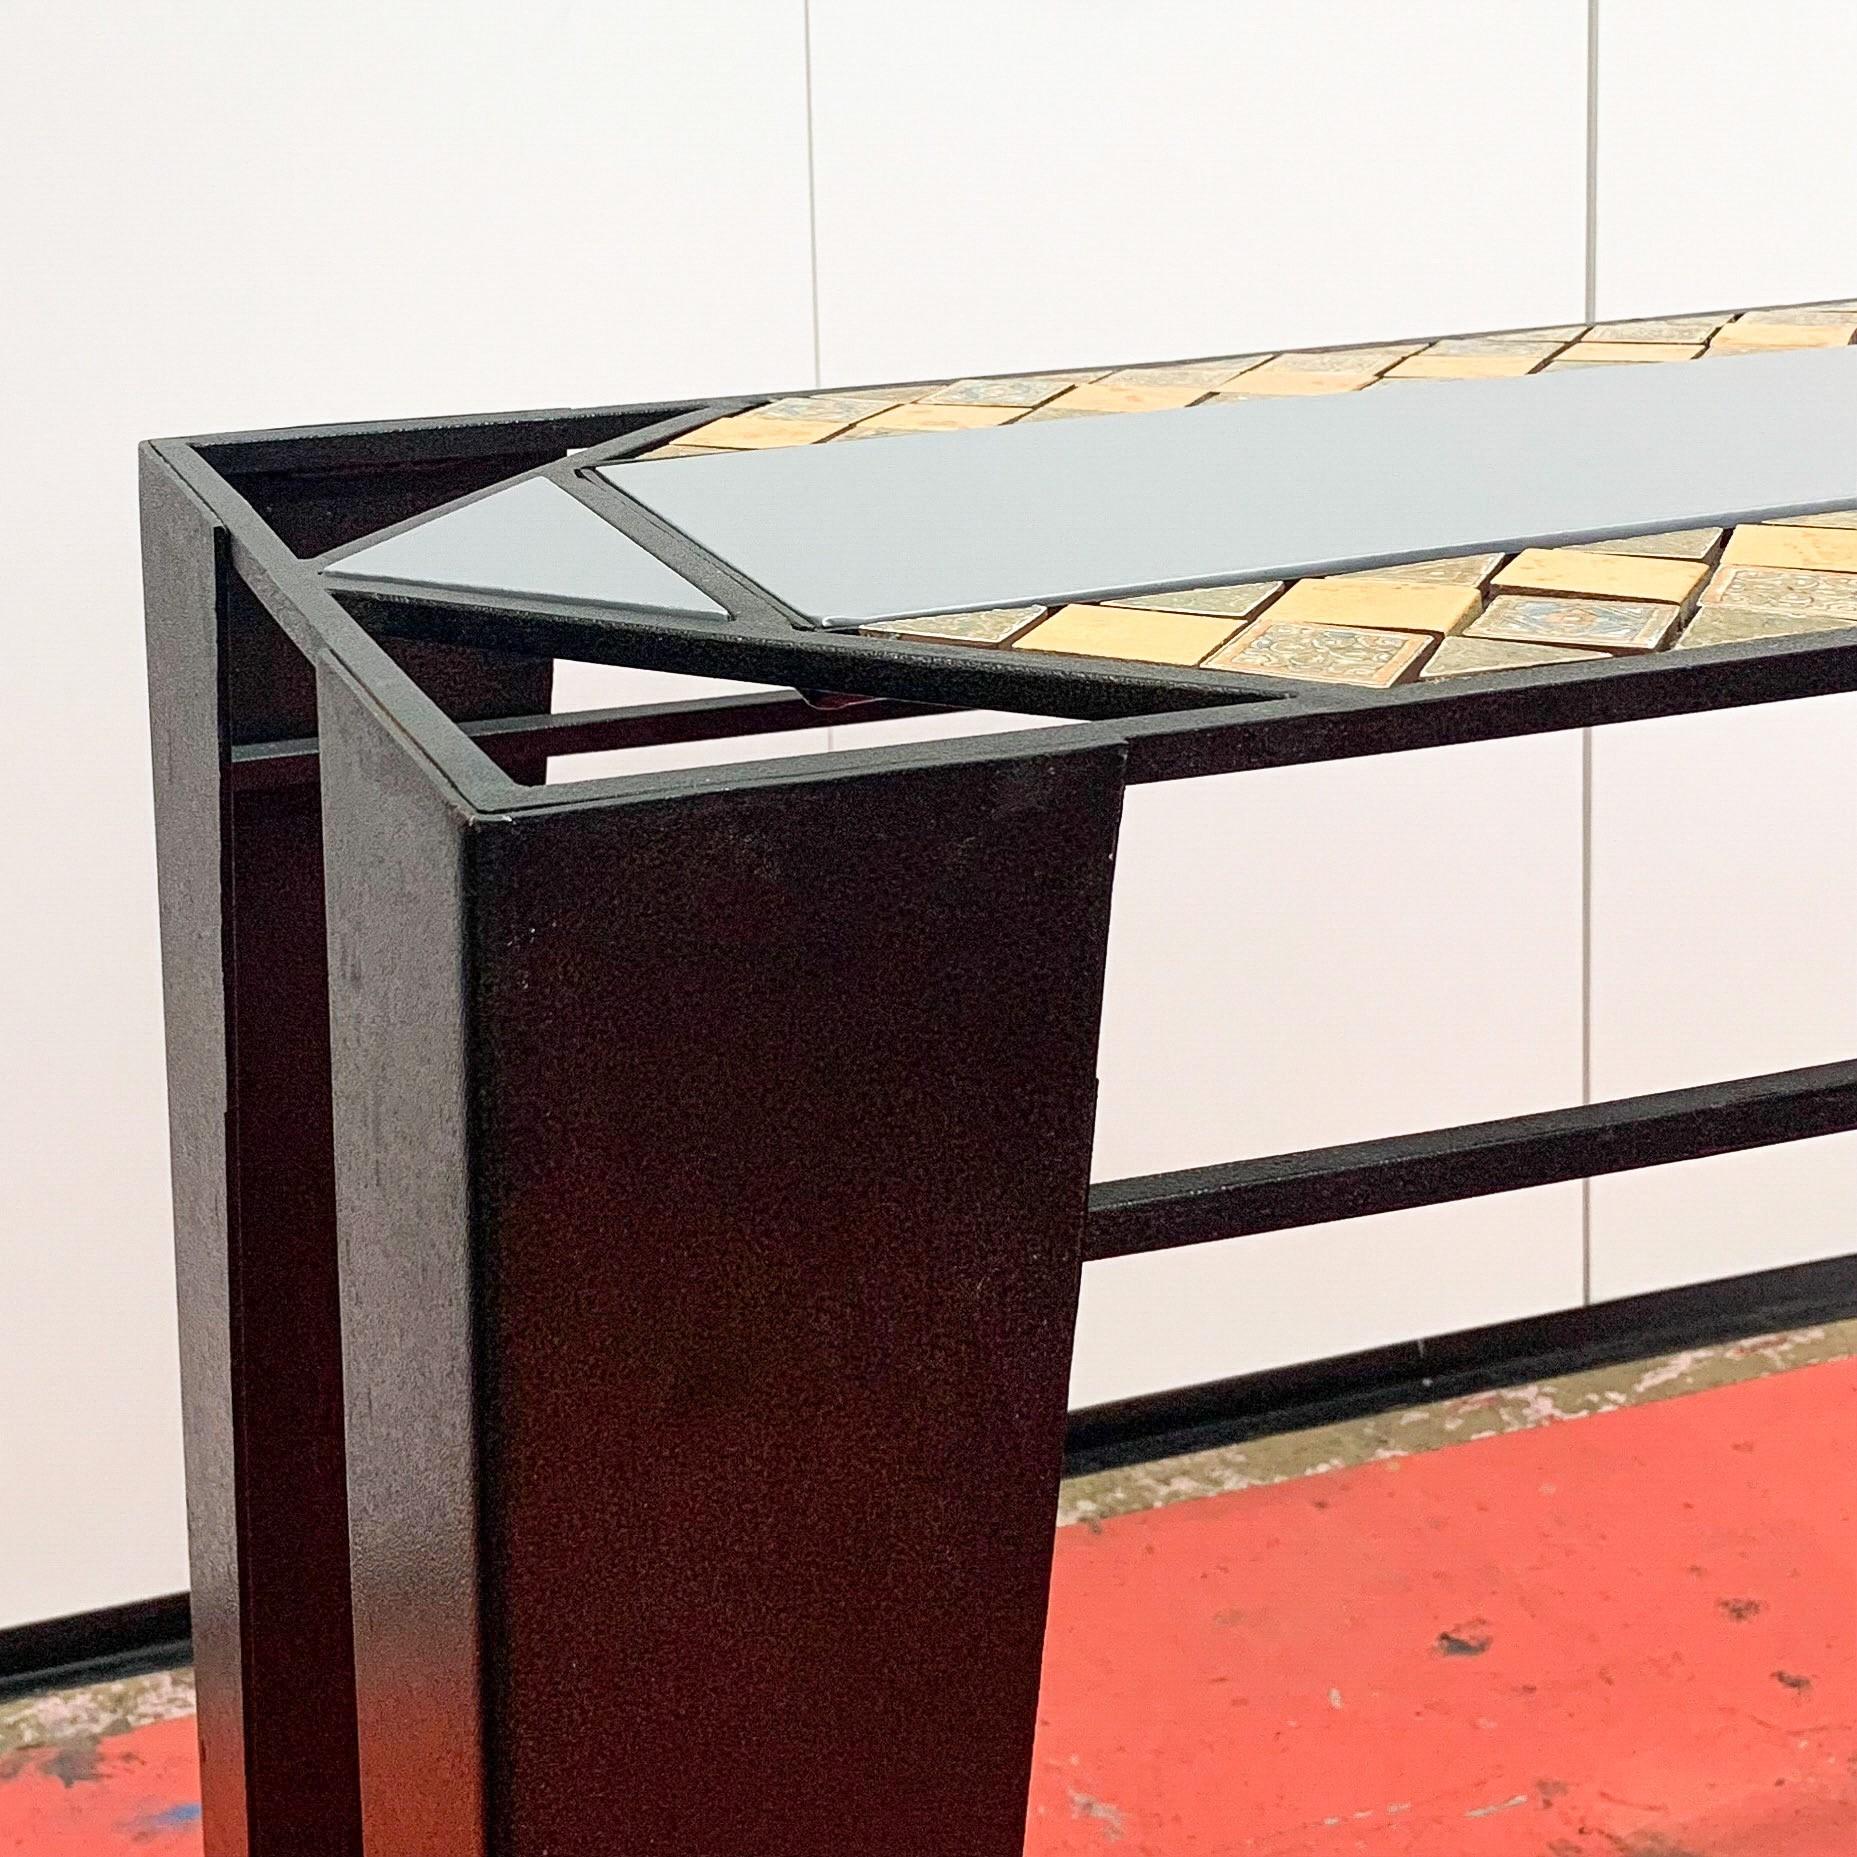 Post-Modern Postmodern Console Table in PVC with Glass & Tiled Top, British, c1990s For Sale